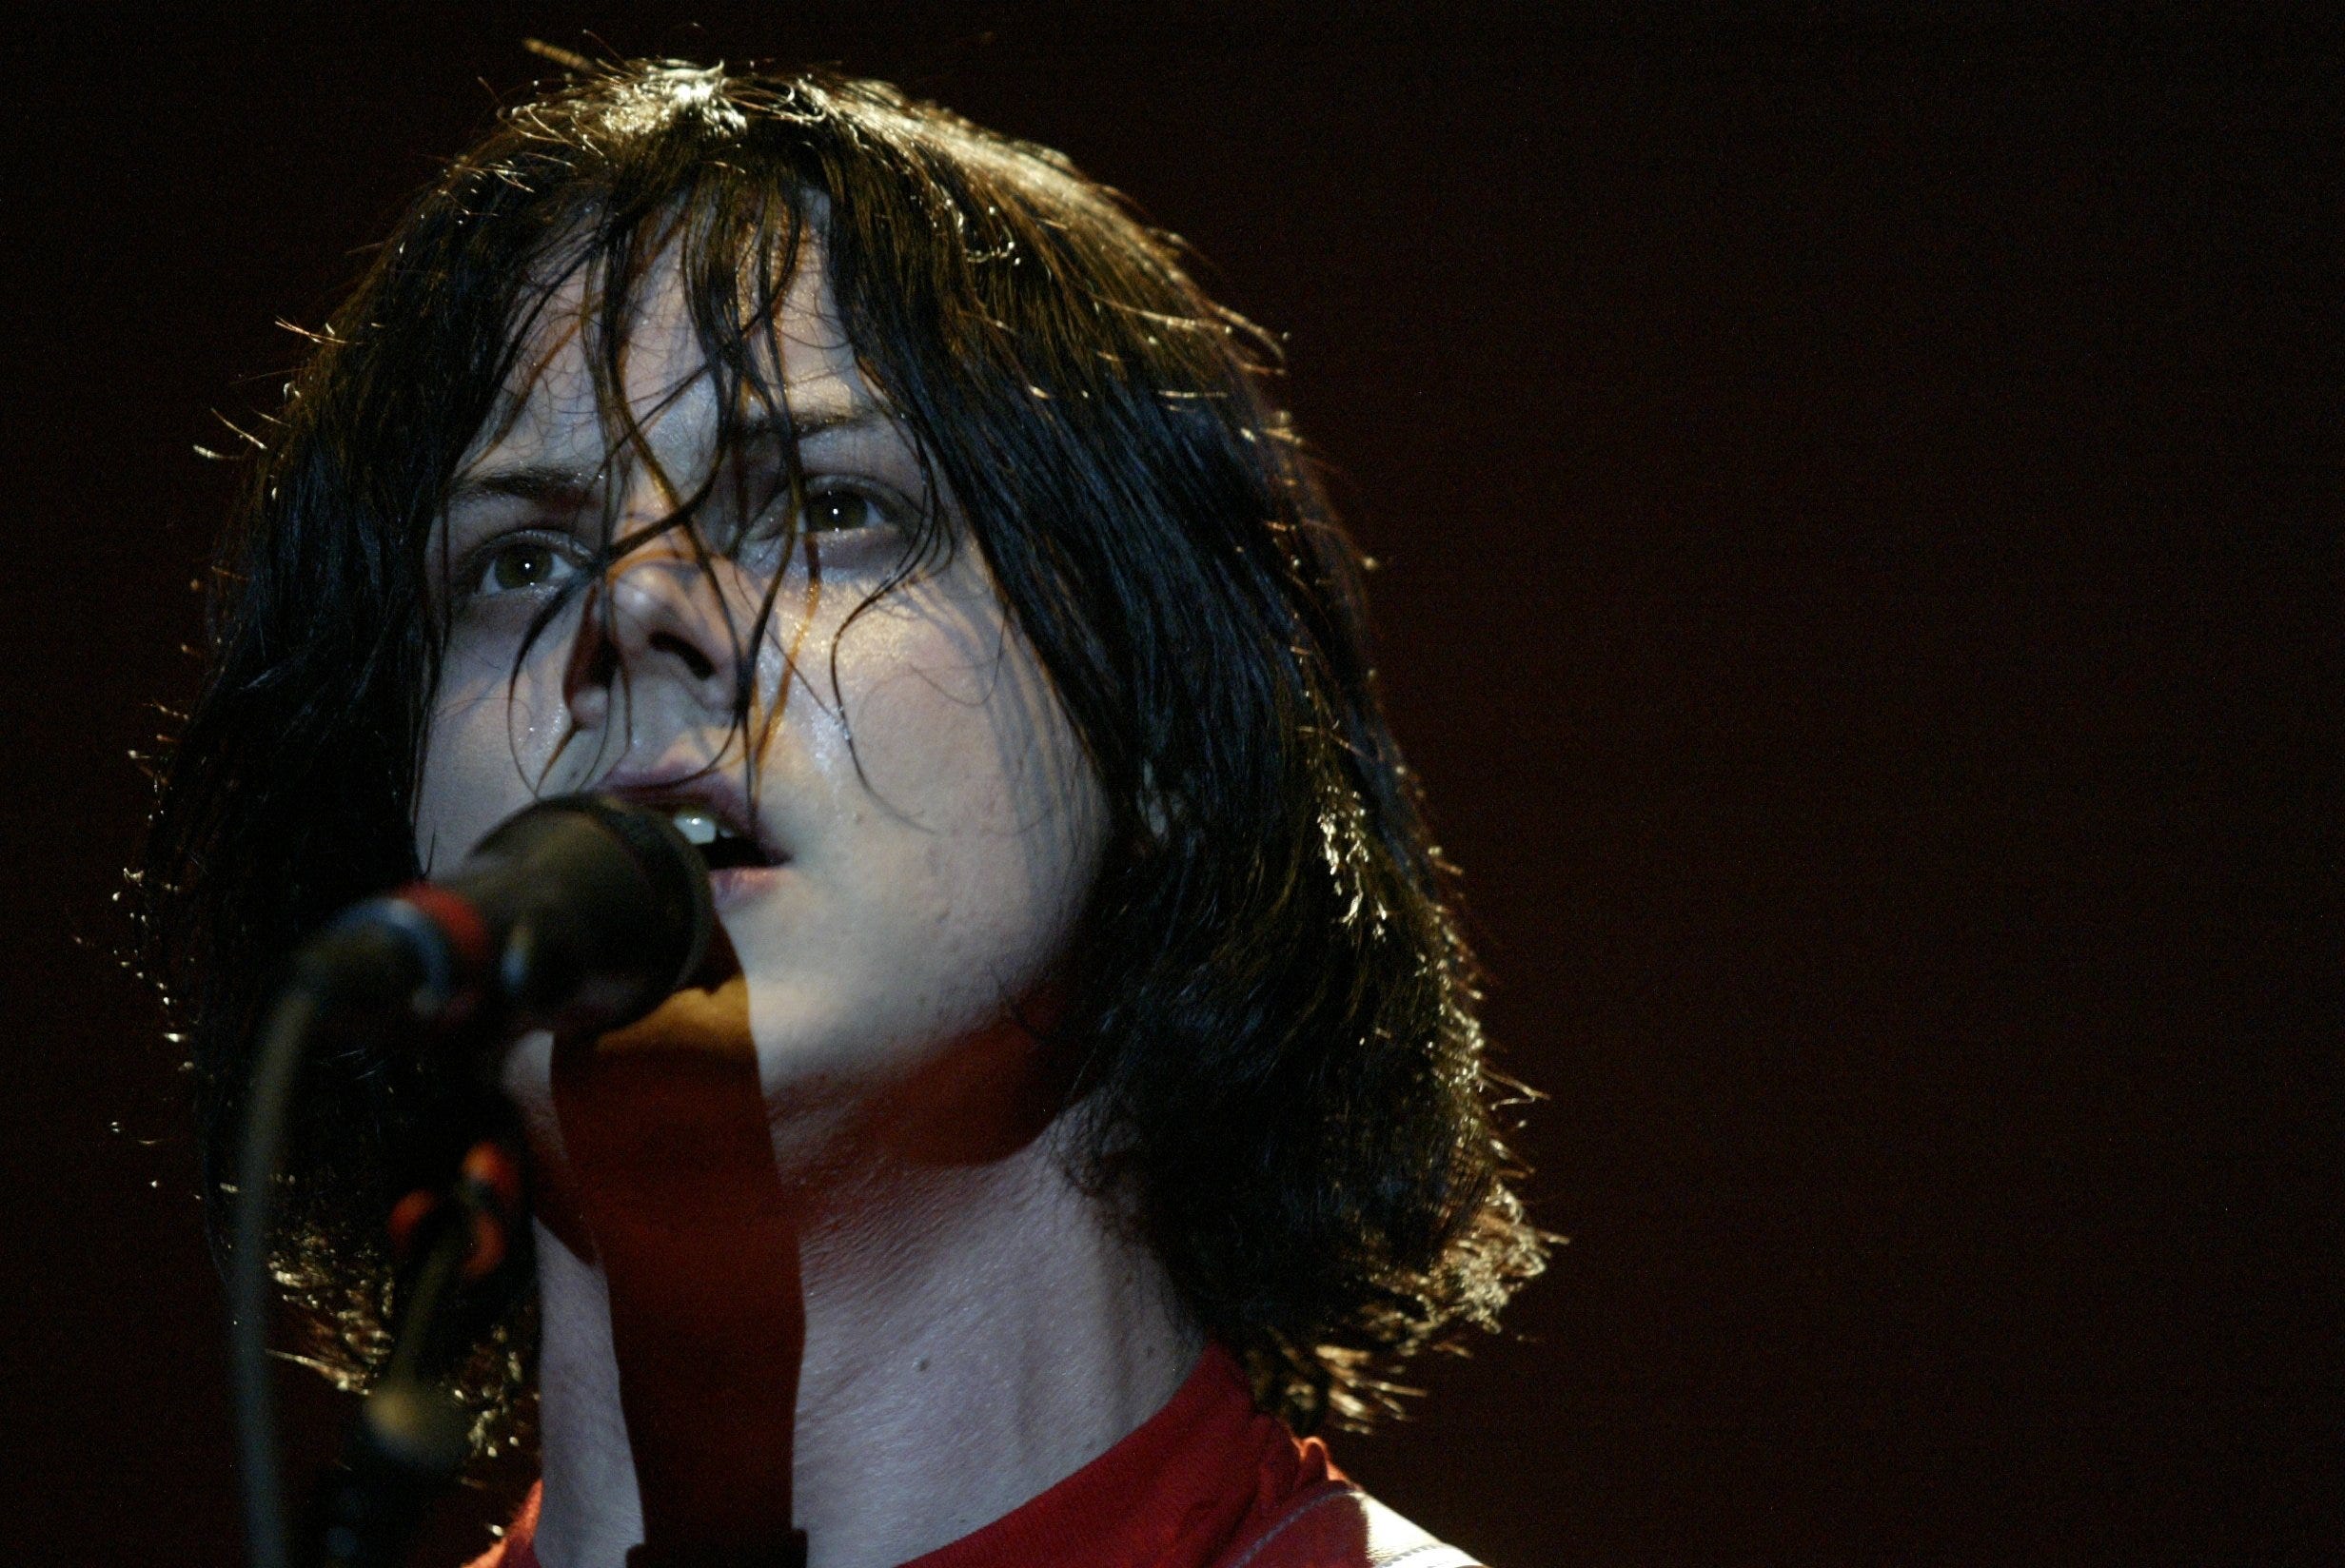 Guitarist Jack White of White Stripes performs during a concert at Masonic Temple in Detroit, on Tuesday, April 15, 2003.